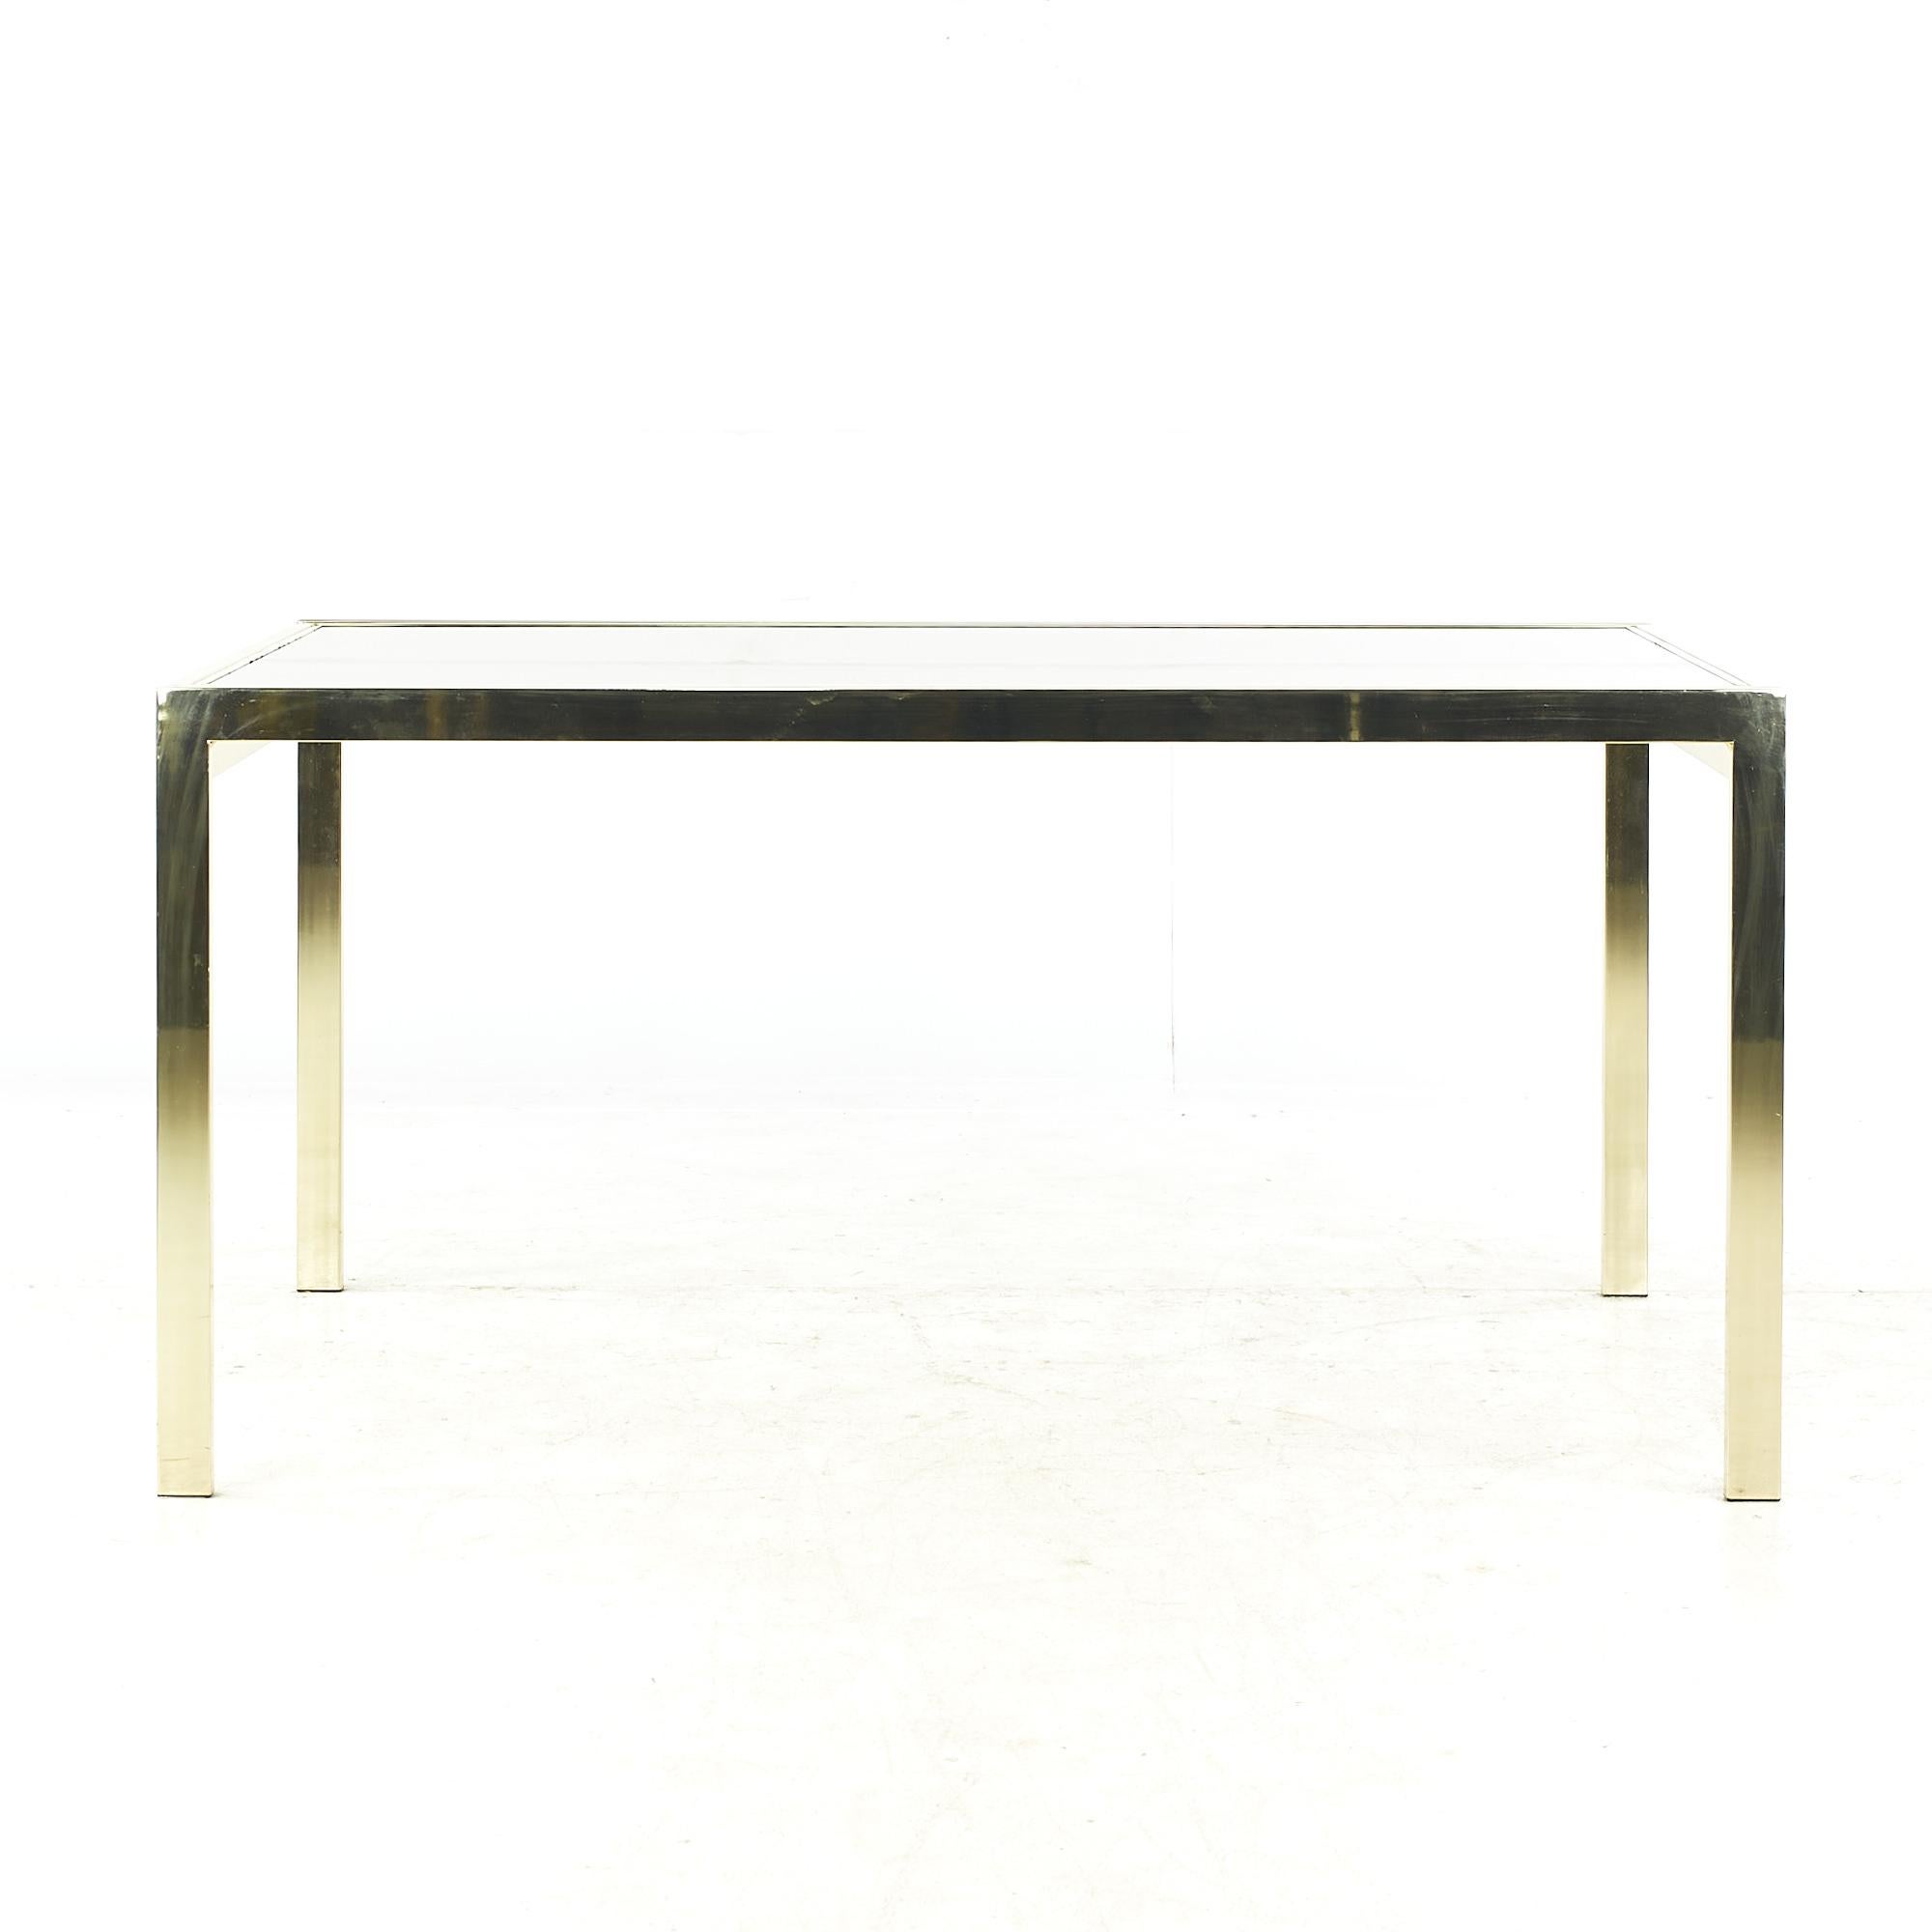 Milo Baughman Style Mid Century Brass and Smoked Glass Extension Dining Table

This table measures: 60 wide x 40 deep x 30 high, with a chair clearance of 26 inches, when fully extended the width of the table is 120 inches

All pieces of furniture